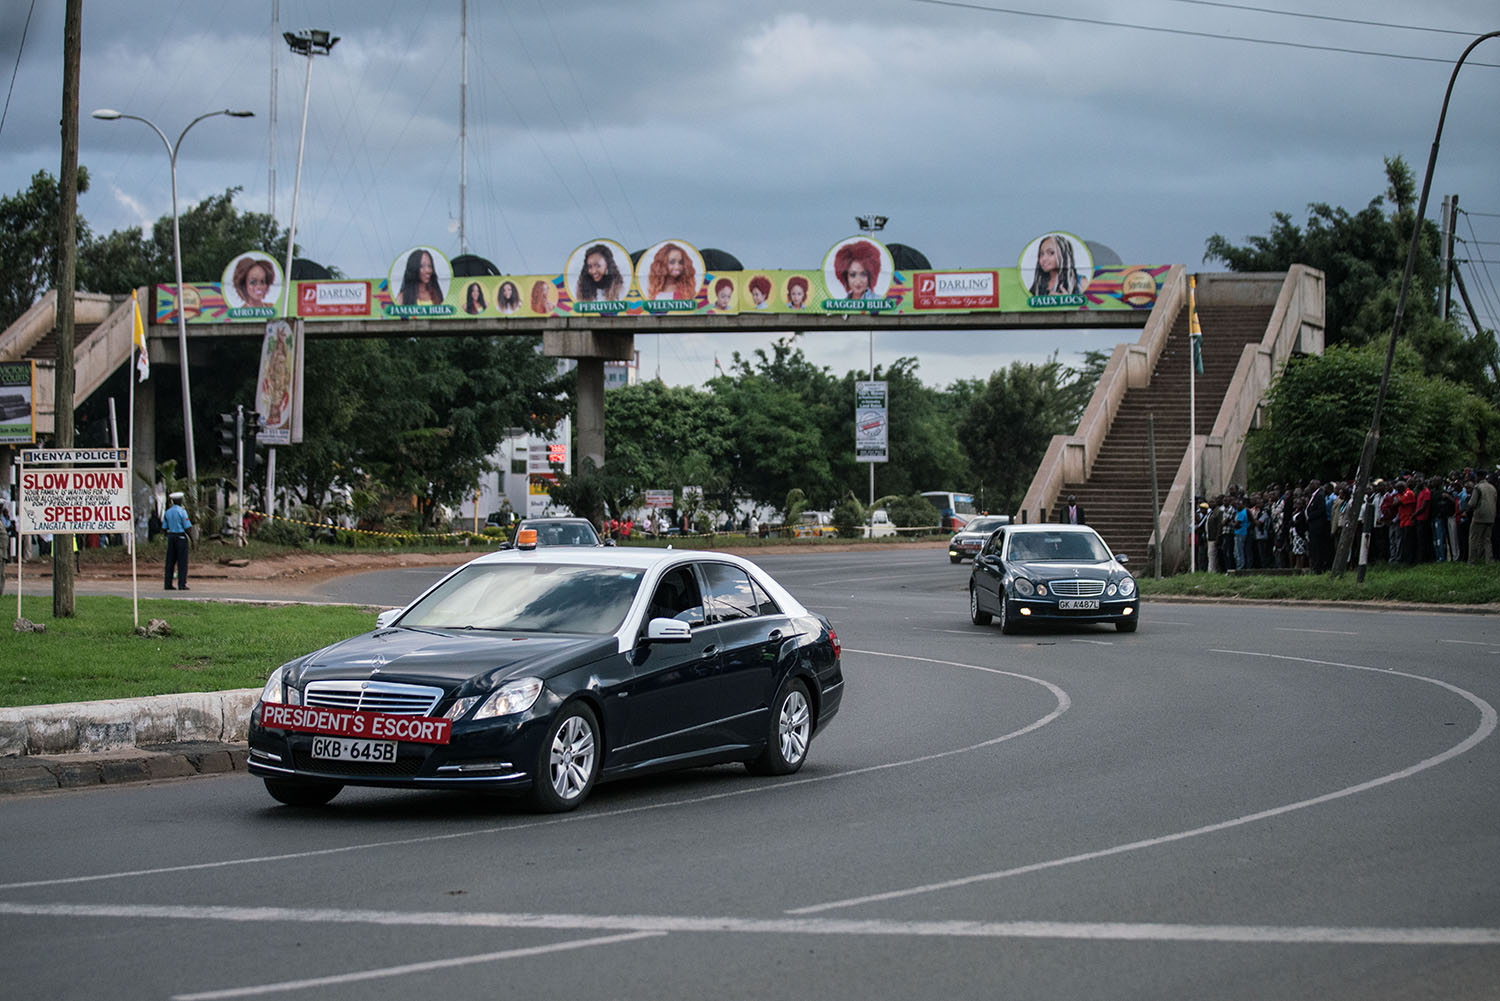 Pope Francis' convoy drives from the airport in Nairobi, Kenya on Nov. 25, 2015.